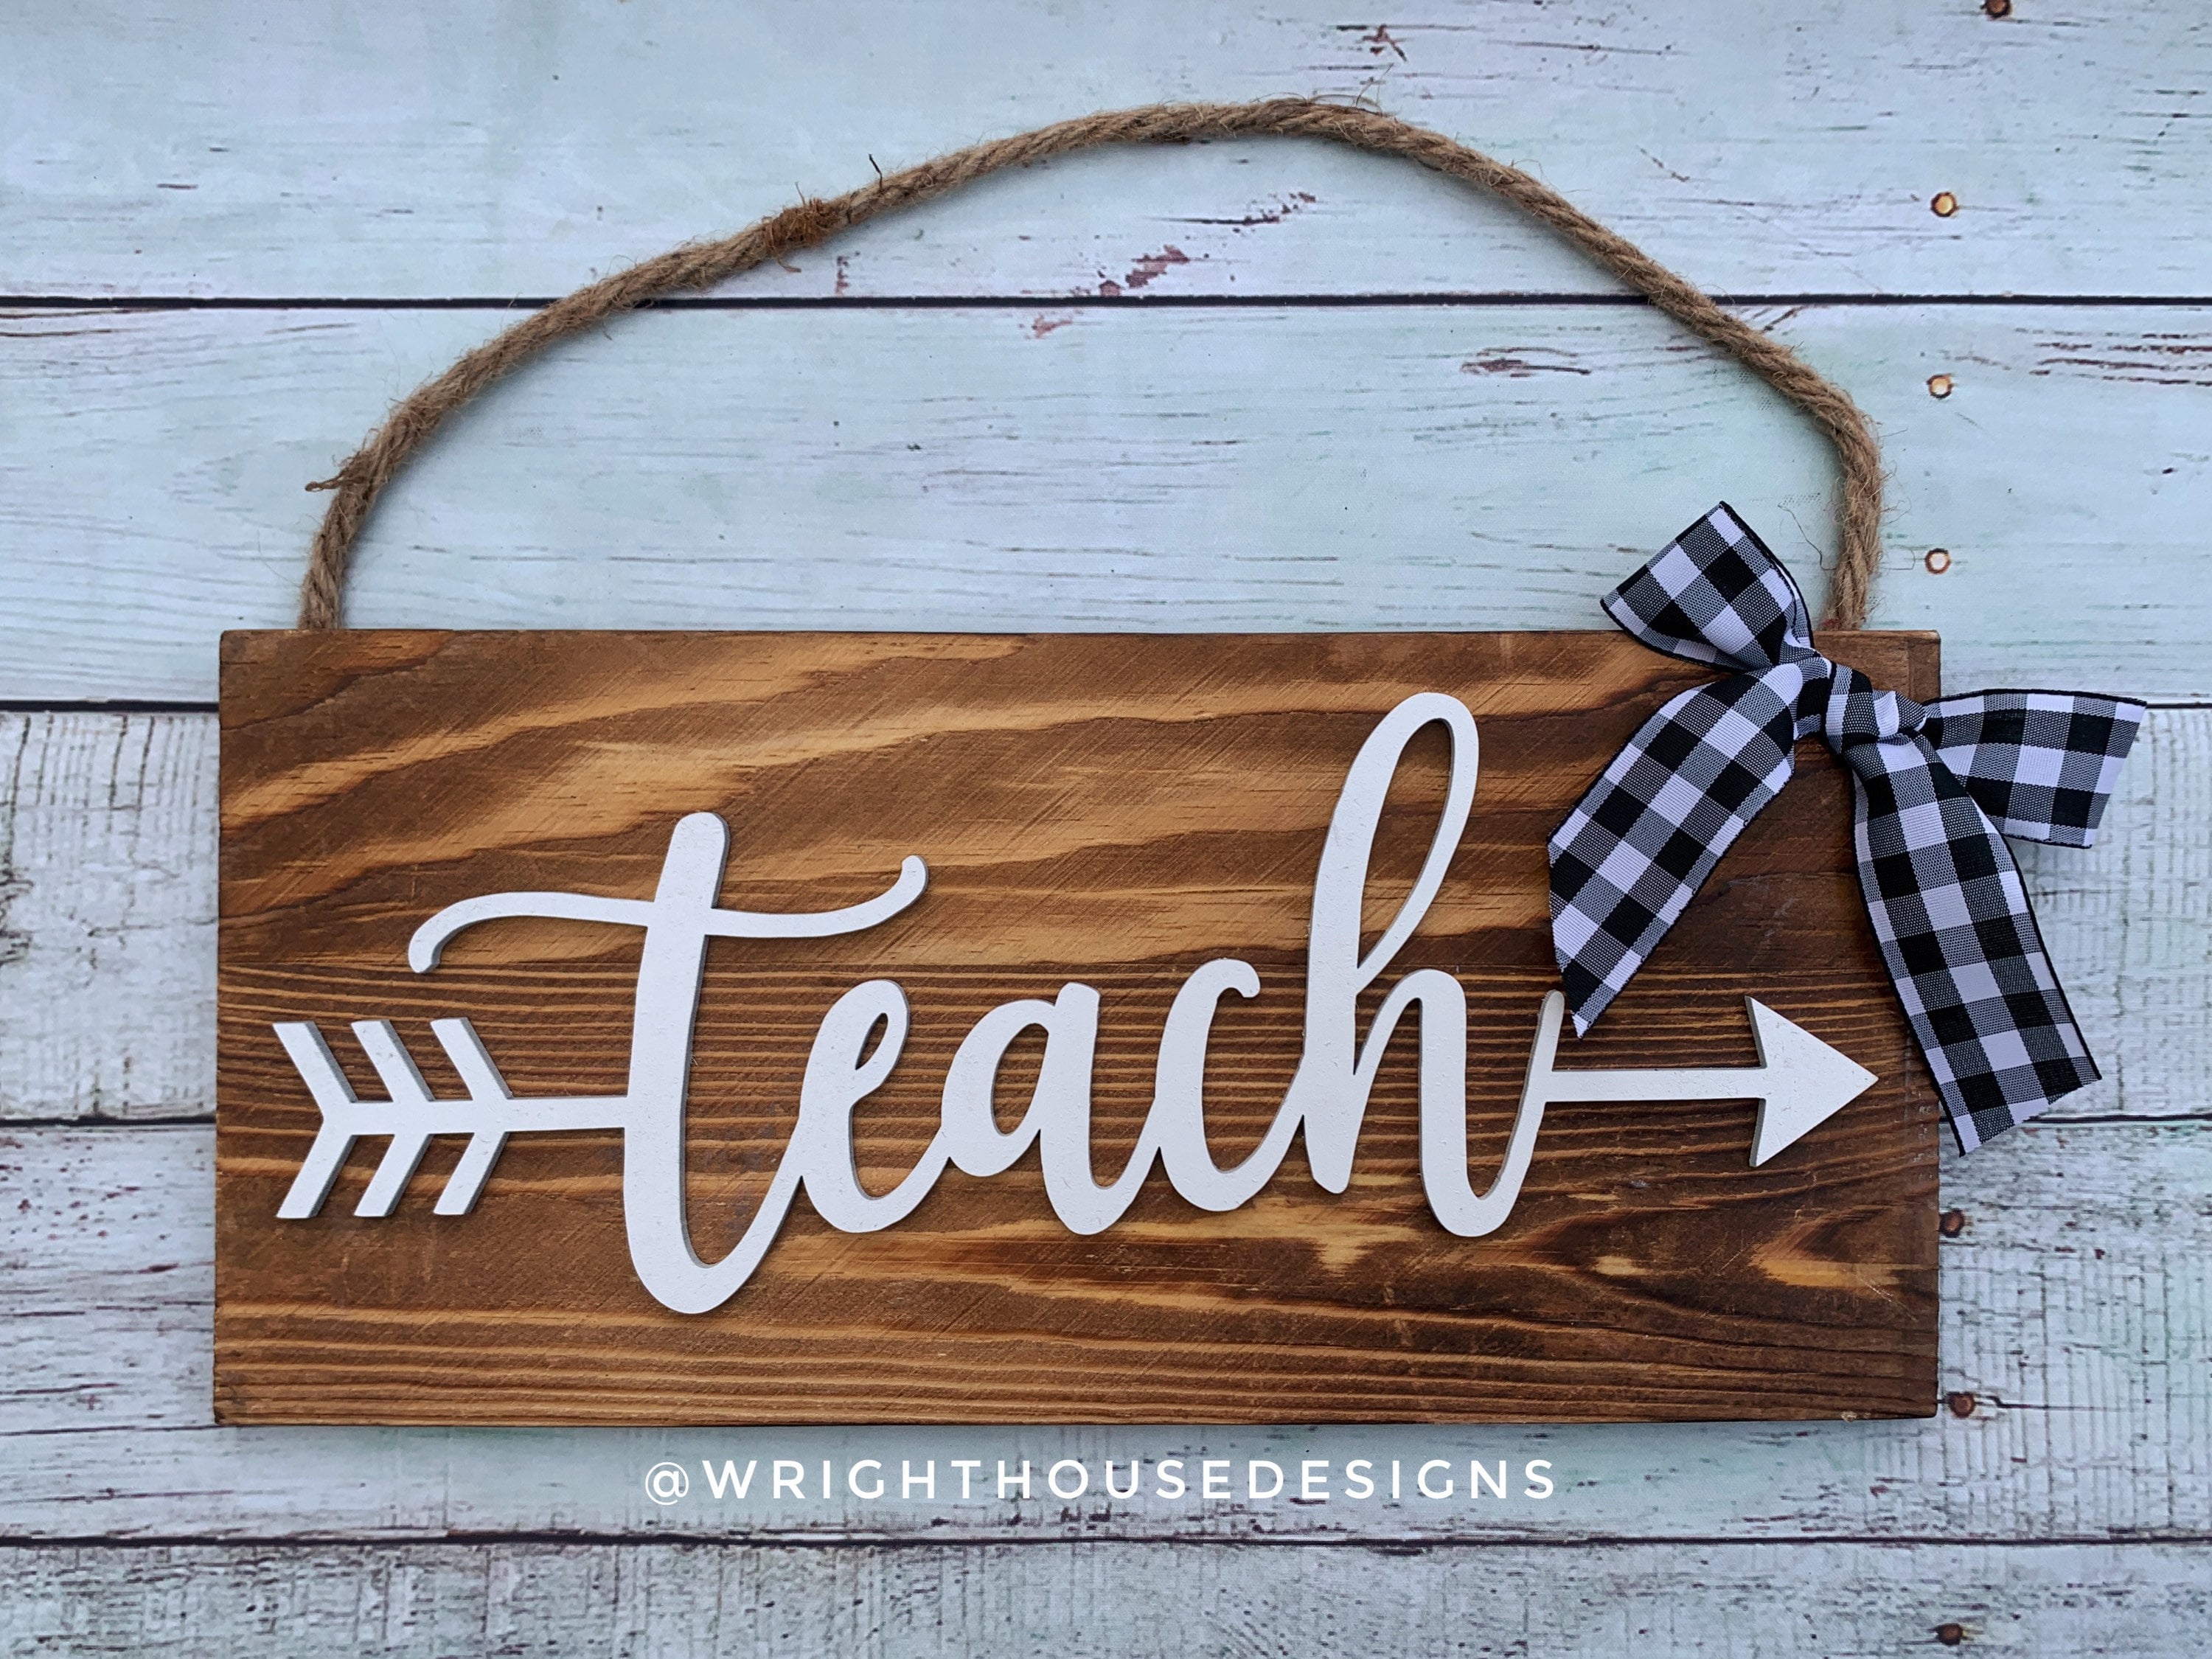 Teach Arrow Word Art - Rustic Farmhouse - Reclaimed Pallet Plank Board Sign - Wooden Wall Art - Bookshelf Decor and She Shed Signs